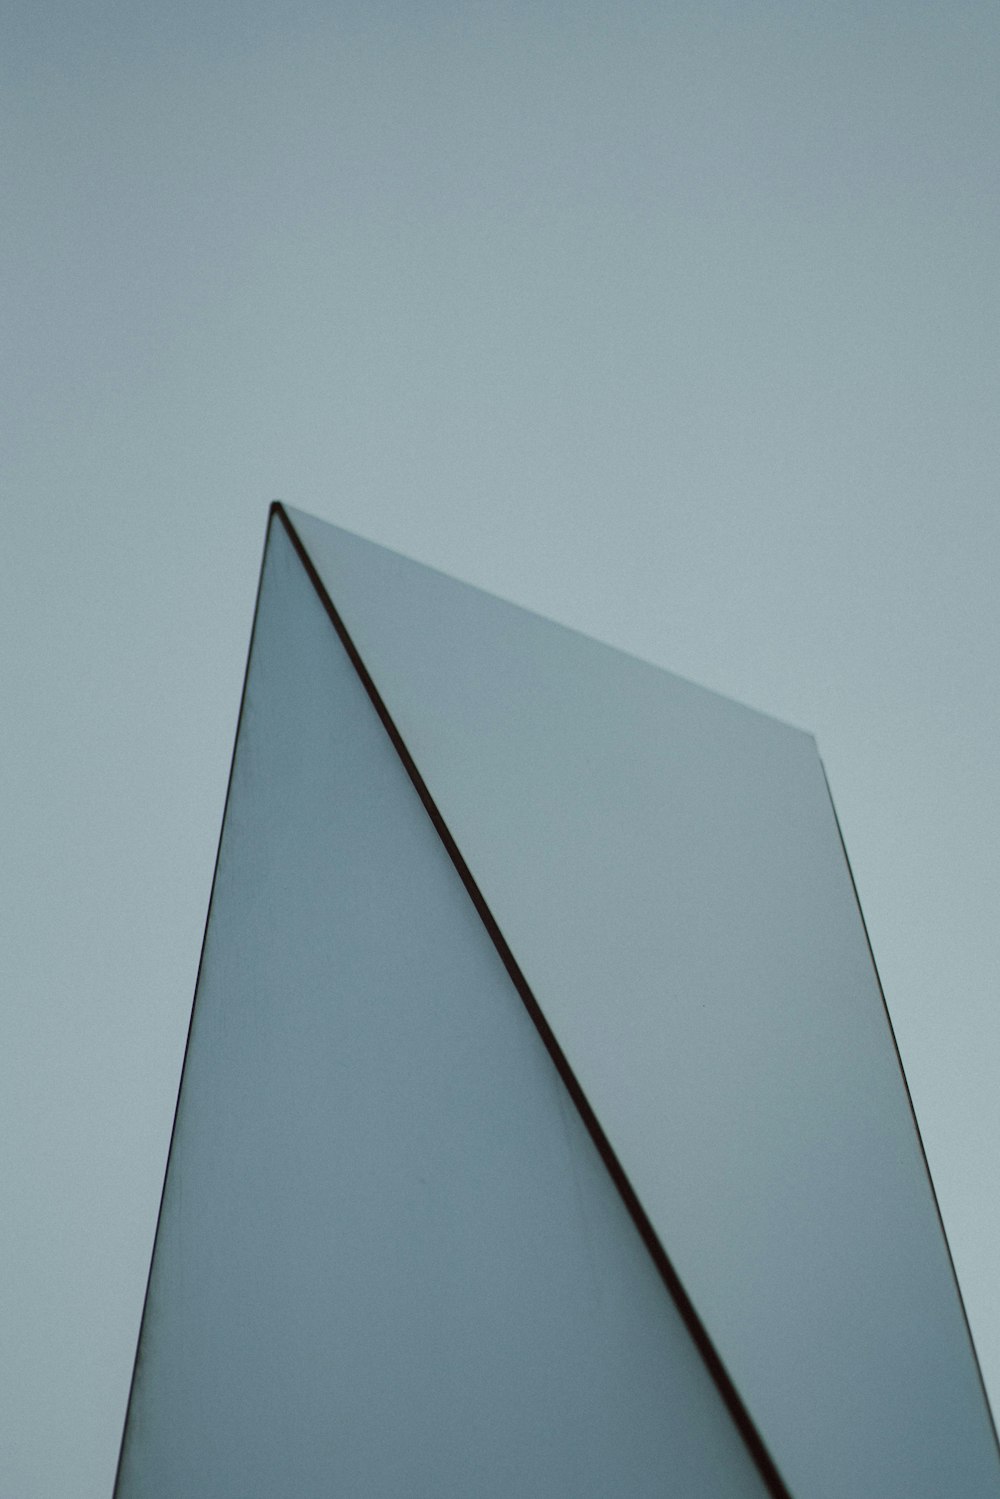 a close up of a glass object against a gray sky